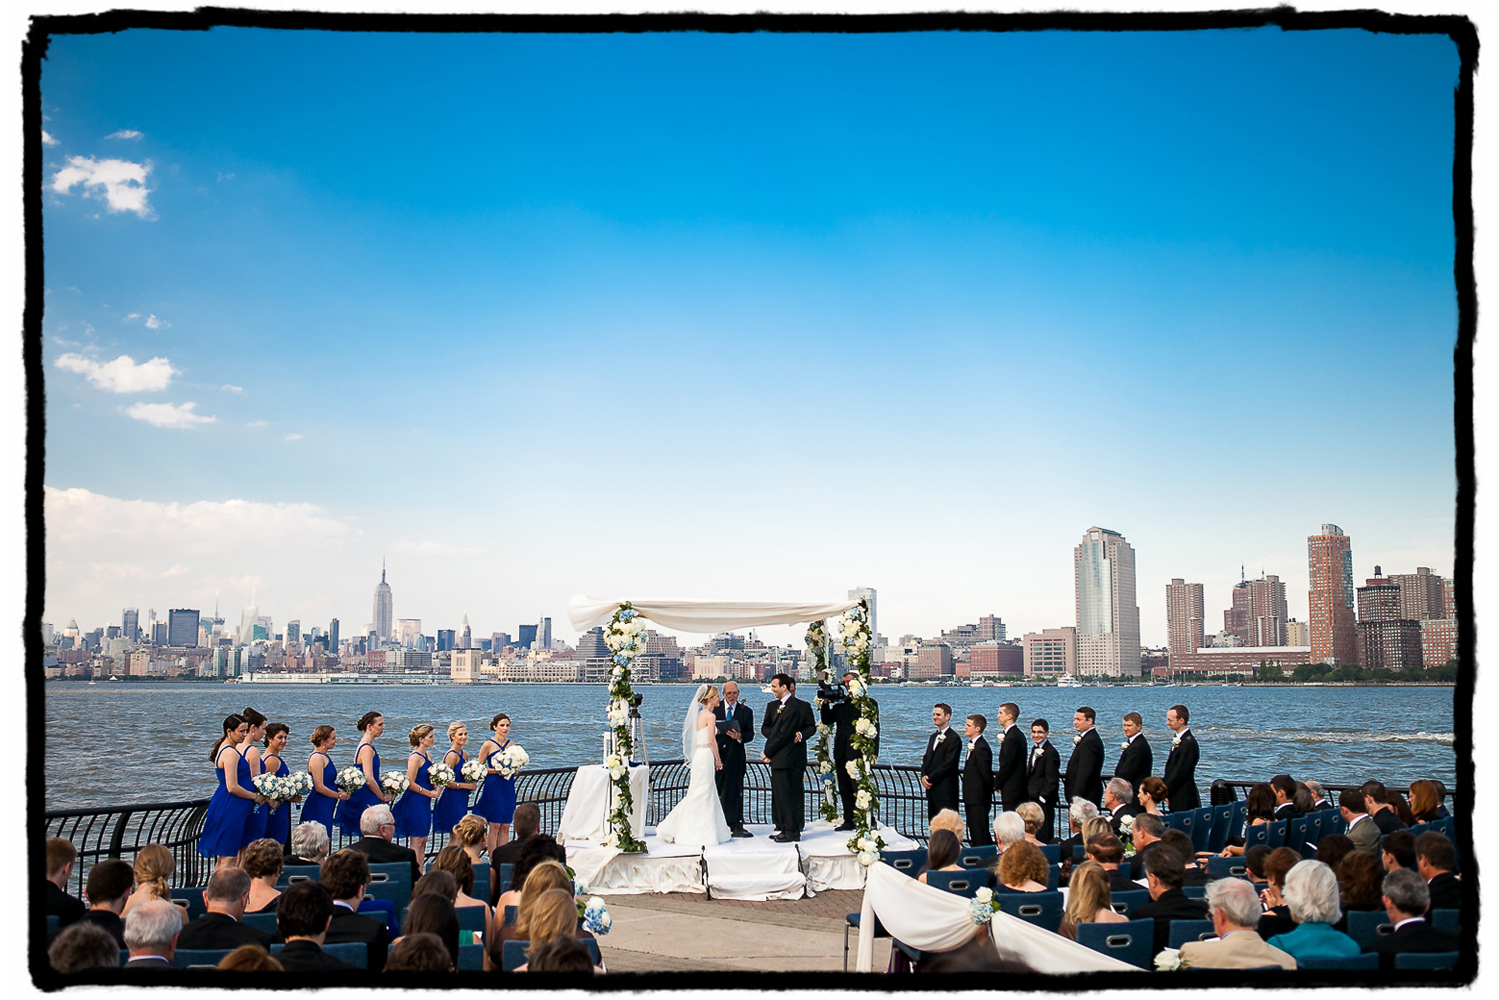 Gena & Josh's guests were treated to a stunning view across the hudson river at The Hyatt in Jersey City.